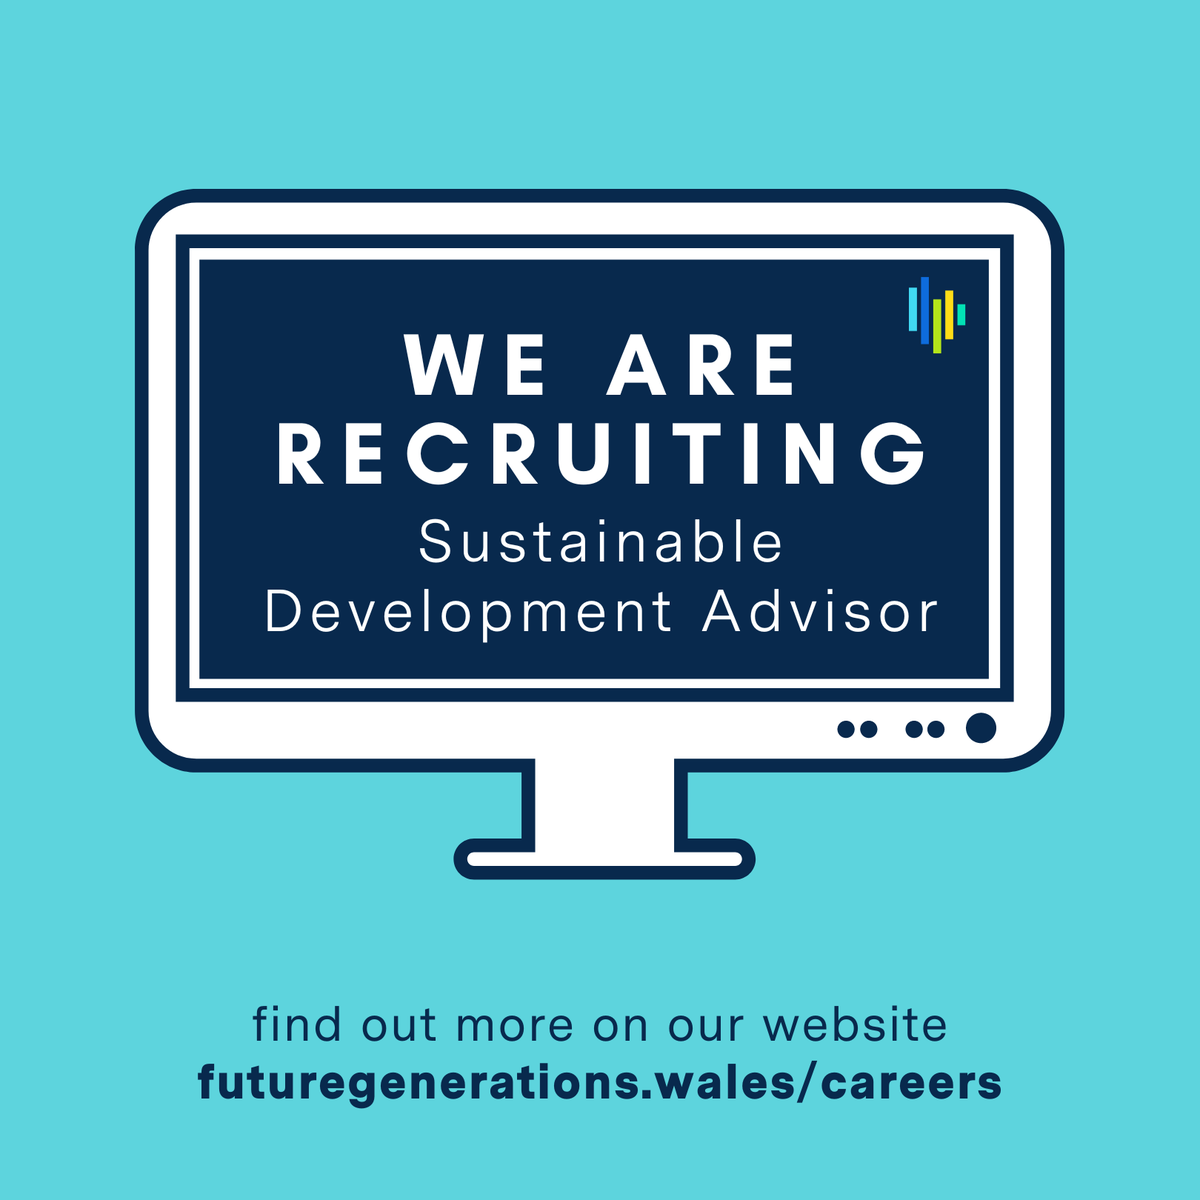 We’re recruiting! Four days to go until applications close for our Sustainable Development Advisor position! Apply here: futuregenerations.wales/careers/matern…